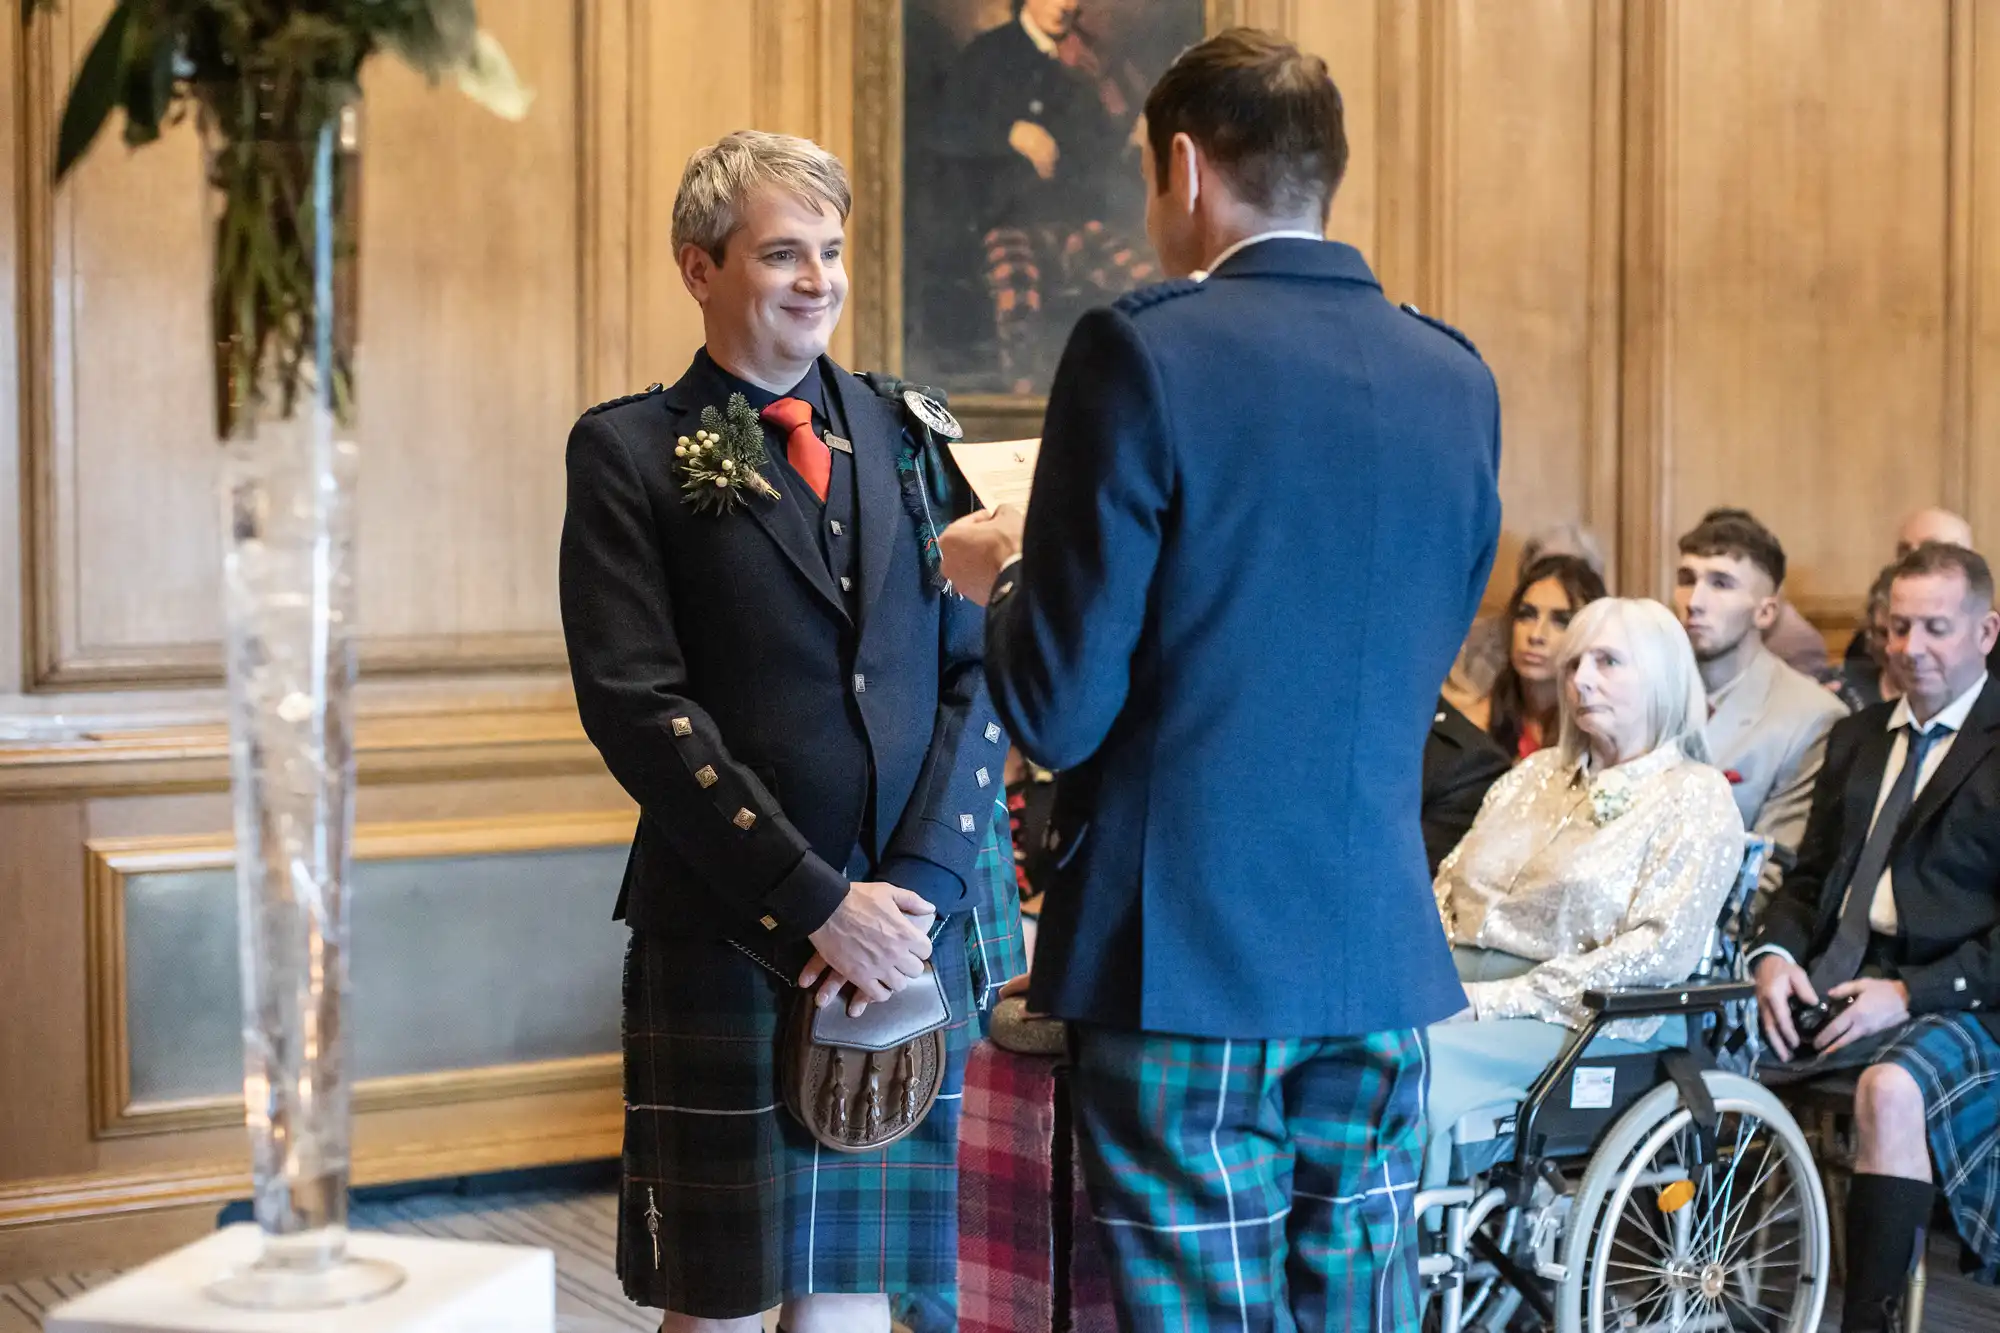 Two men in tartan attire stand facing each other during a ceremony in a wood-paneled room, with guests, including one in a wheelchair, seated and watching.